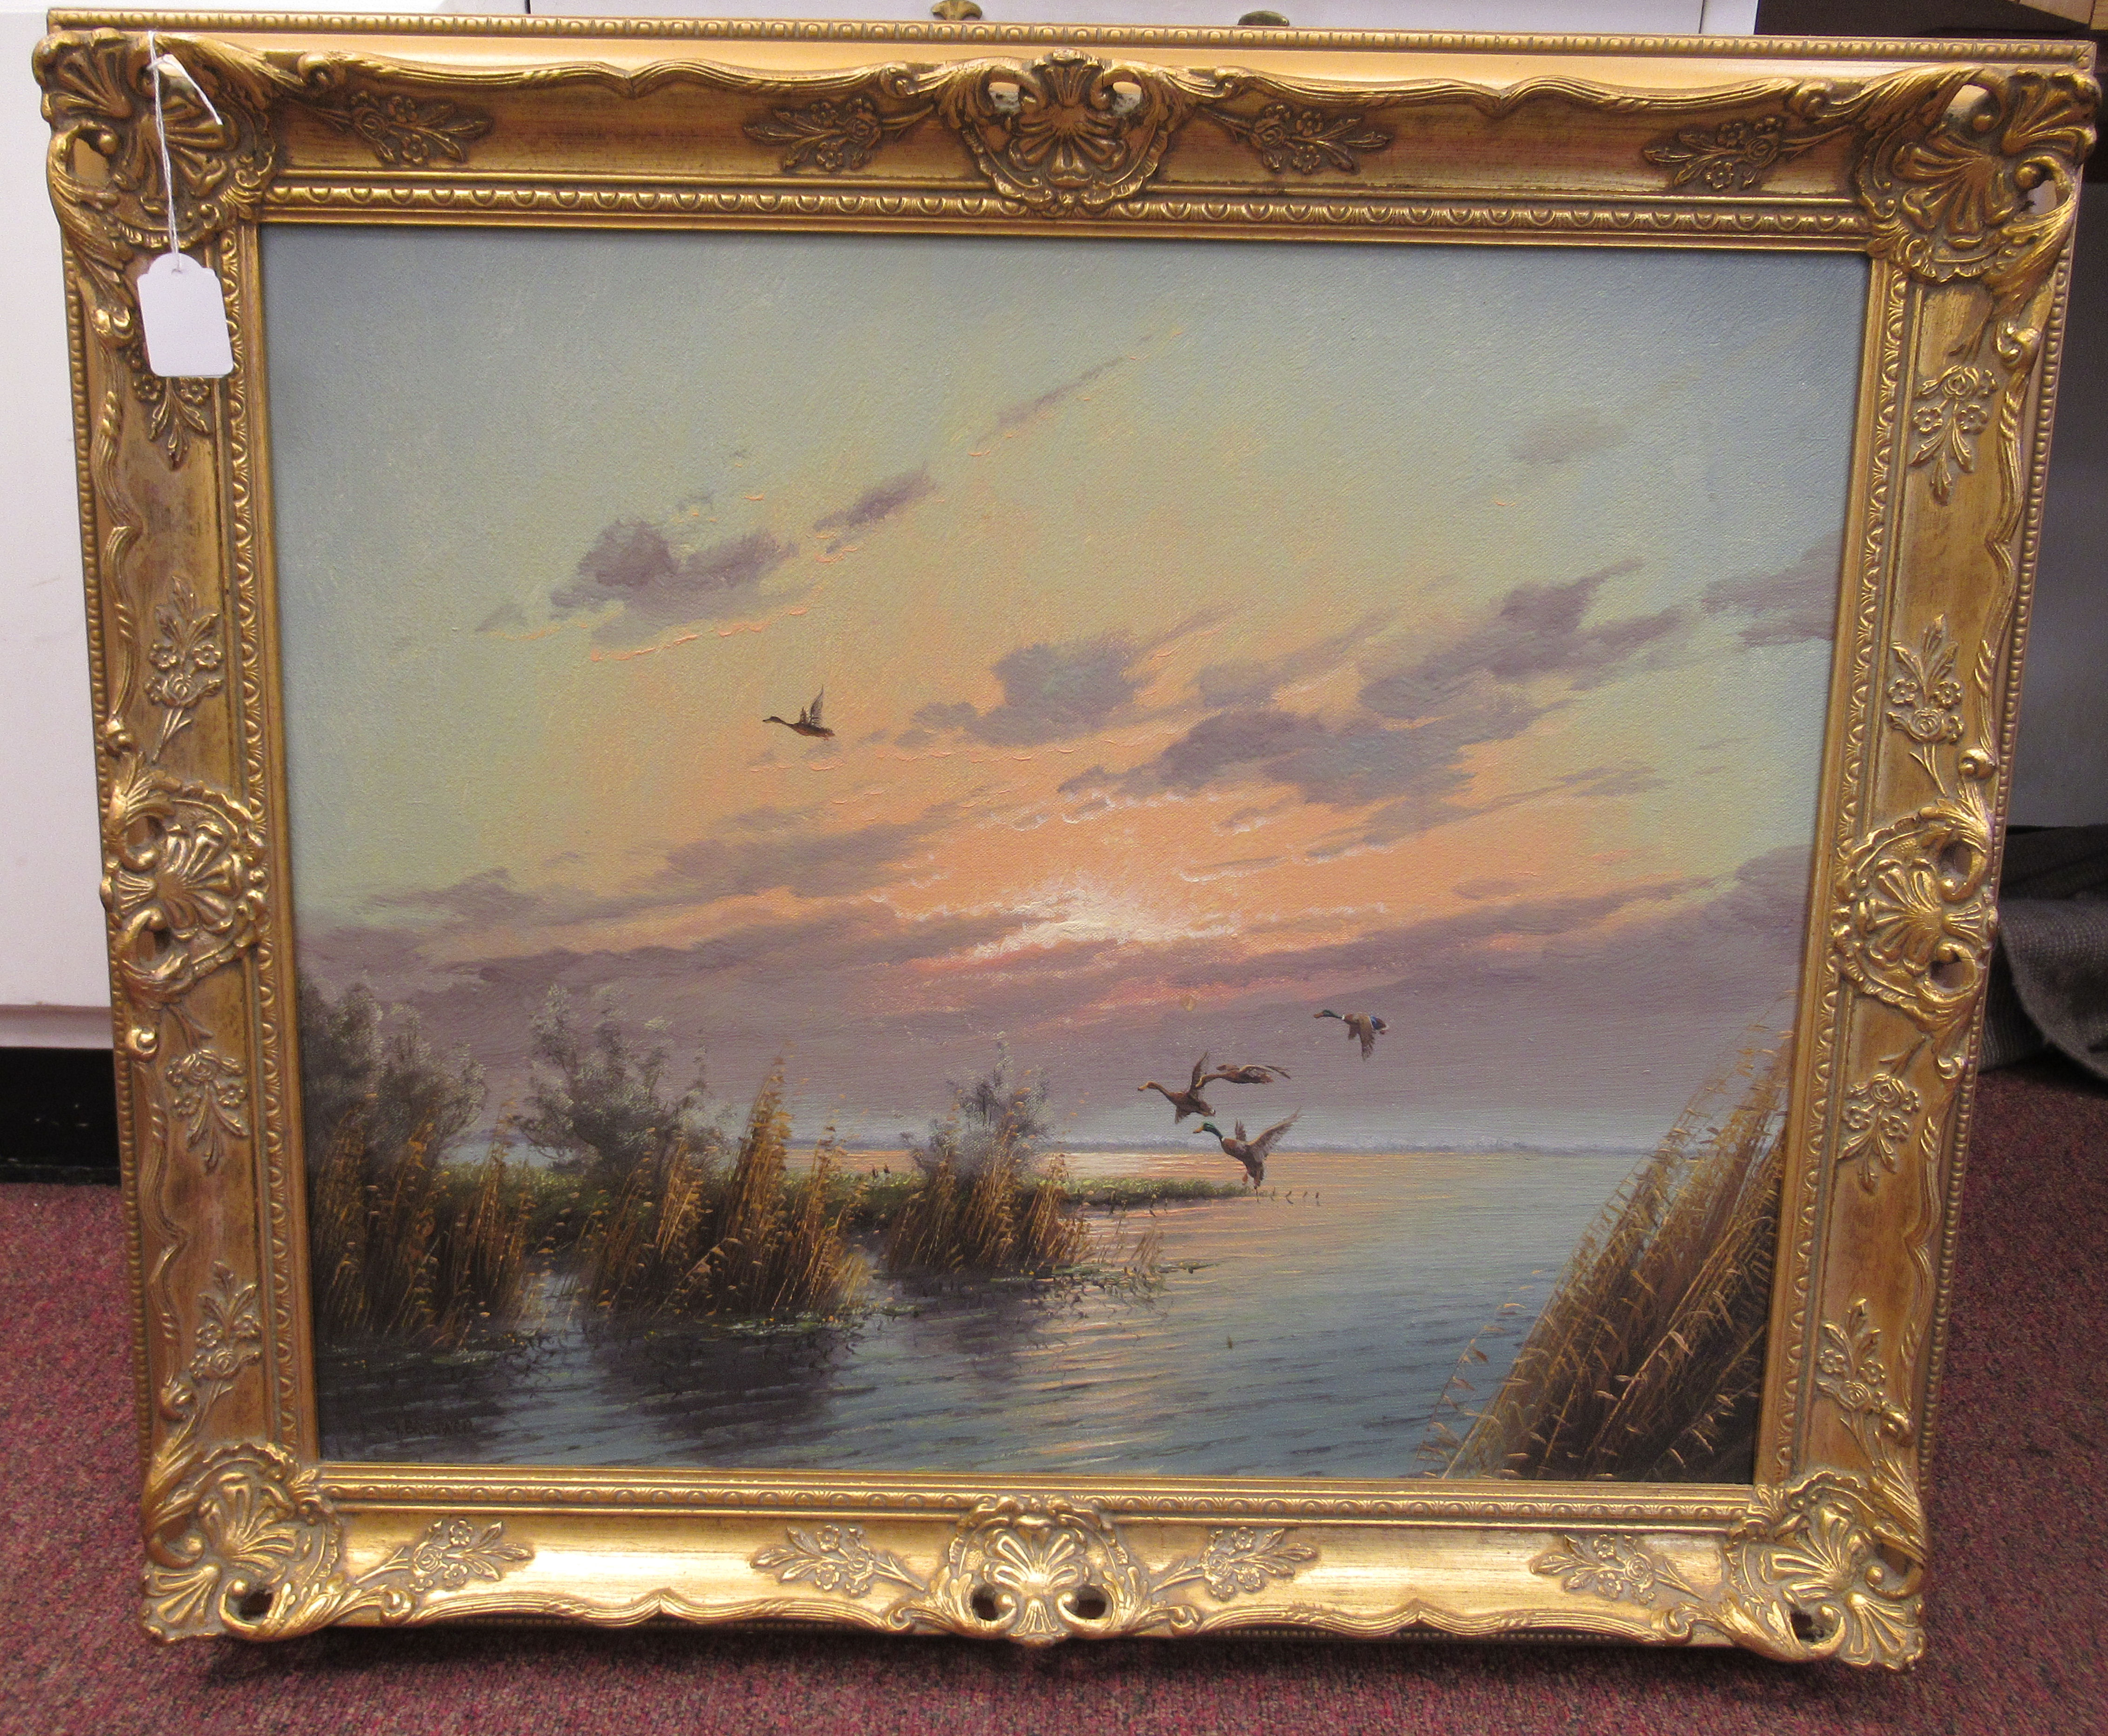 G Brouwer - Mallards over still water at dusk  oil on canvas  bears a signature  19.5'' x 23.5''